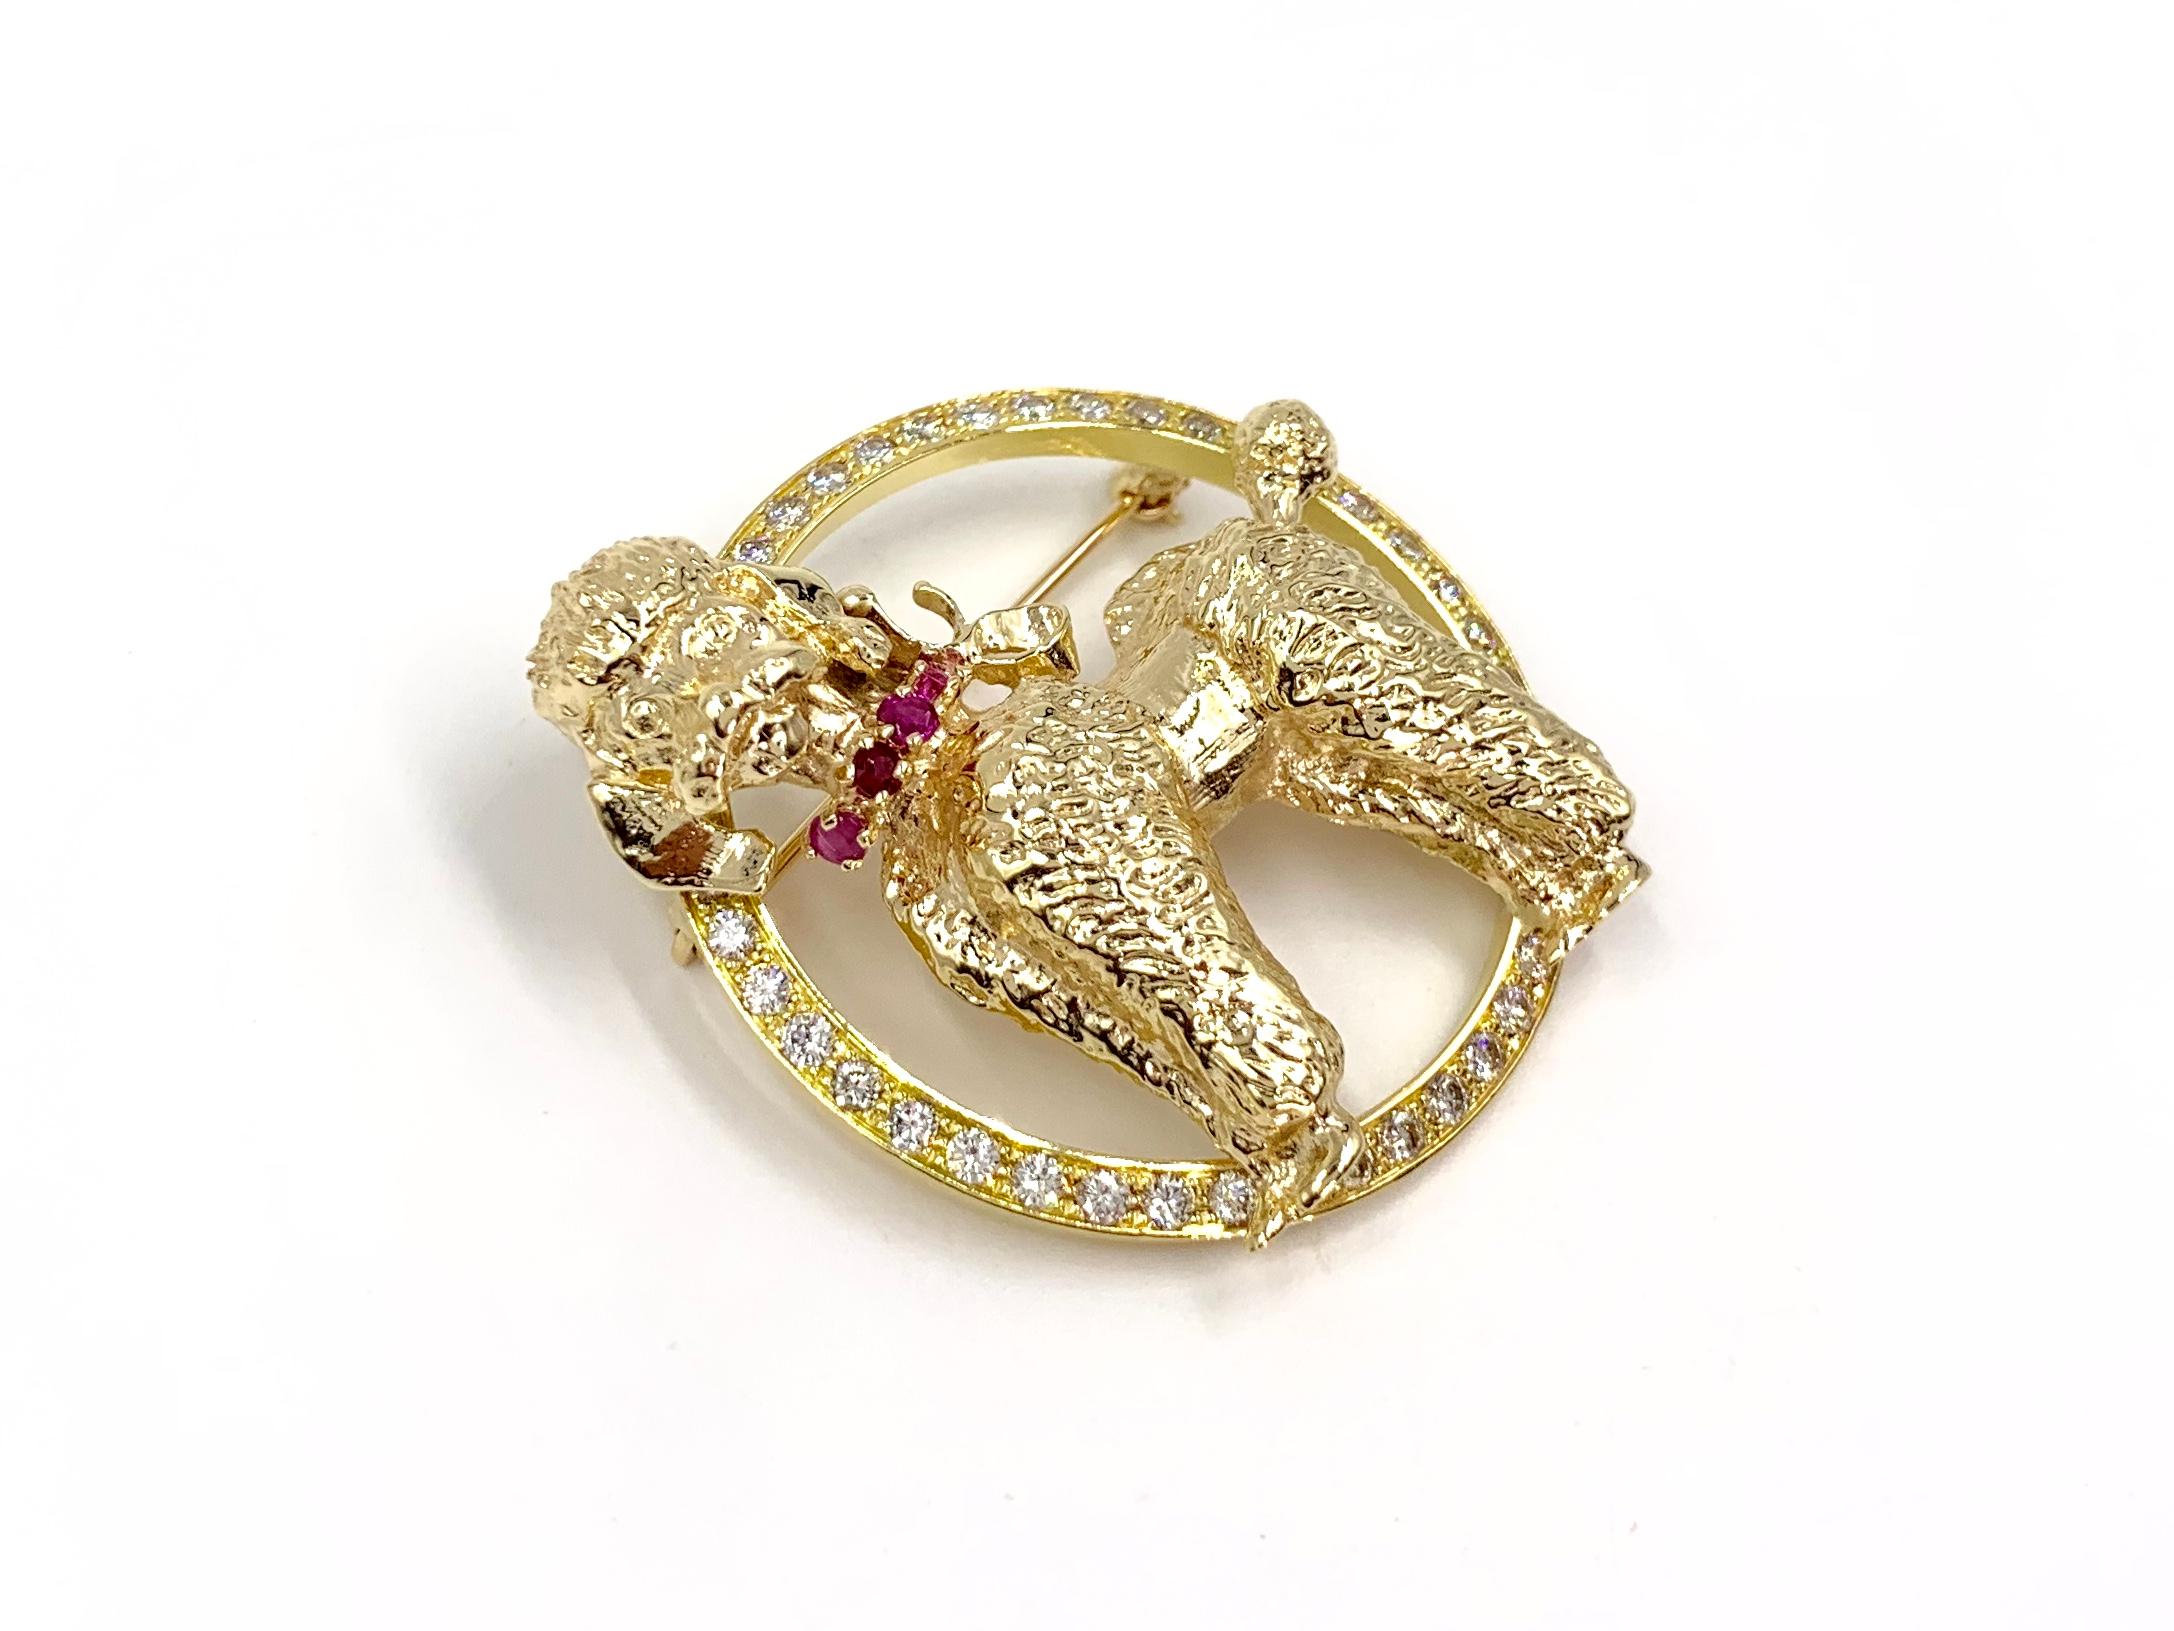 An adorable vintage poodle dog brooch. This 14 karat yellow gold poodle is doting a ruby collar within a white diamond circle. Approximate diamond weight is .75 carats at approximately G color, VS2 clarity. Diameter of circle is 35mm (just shy of